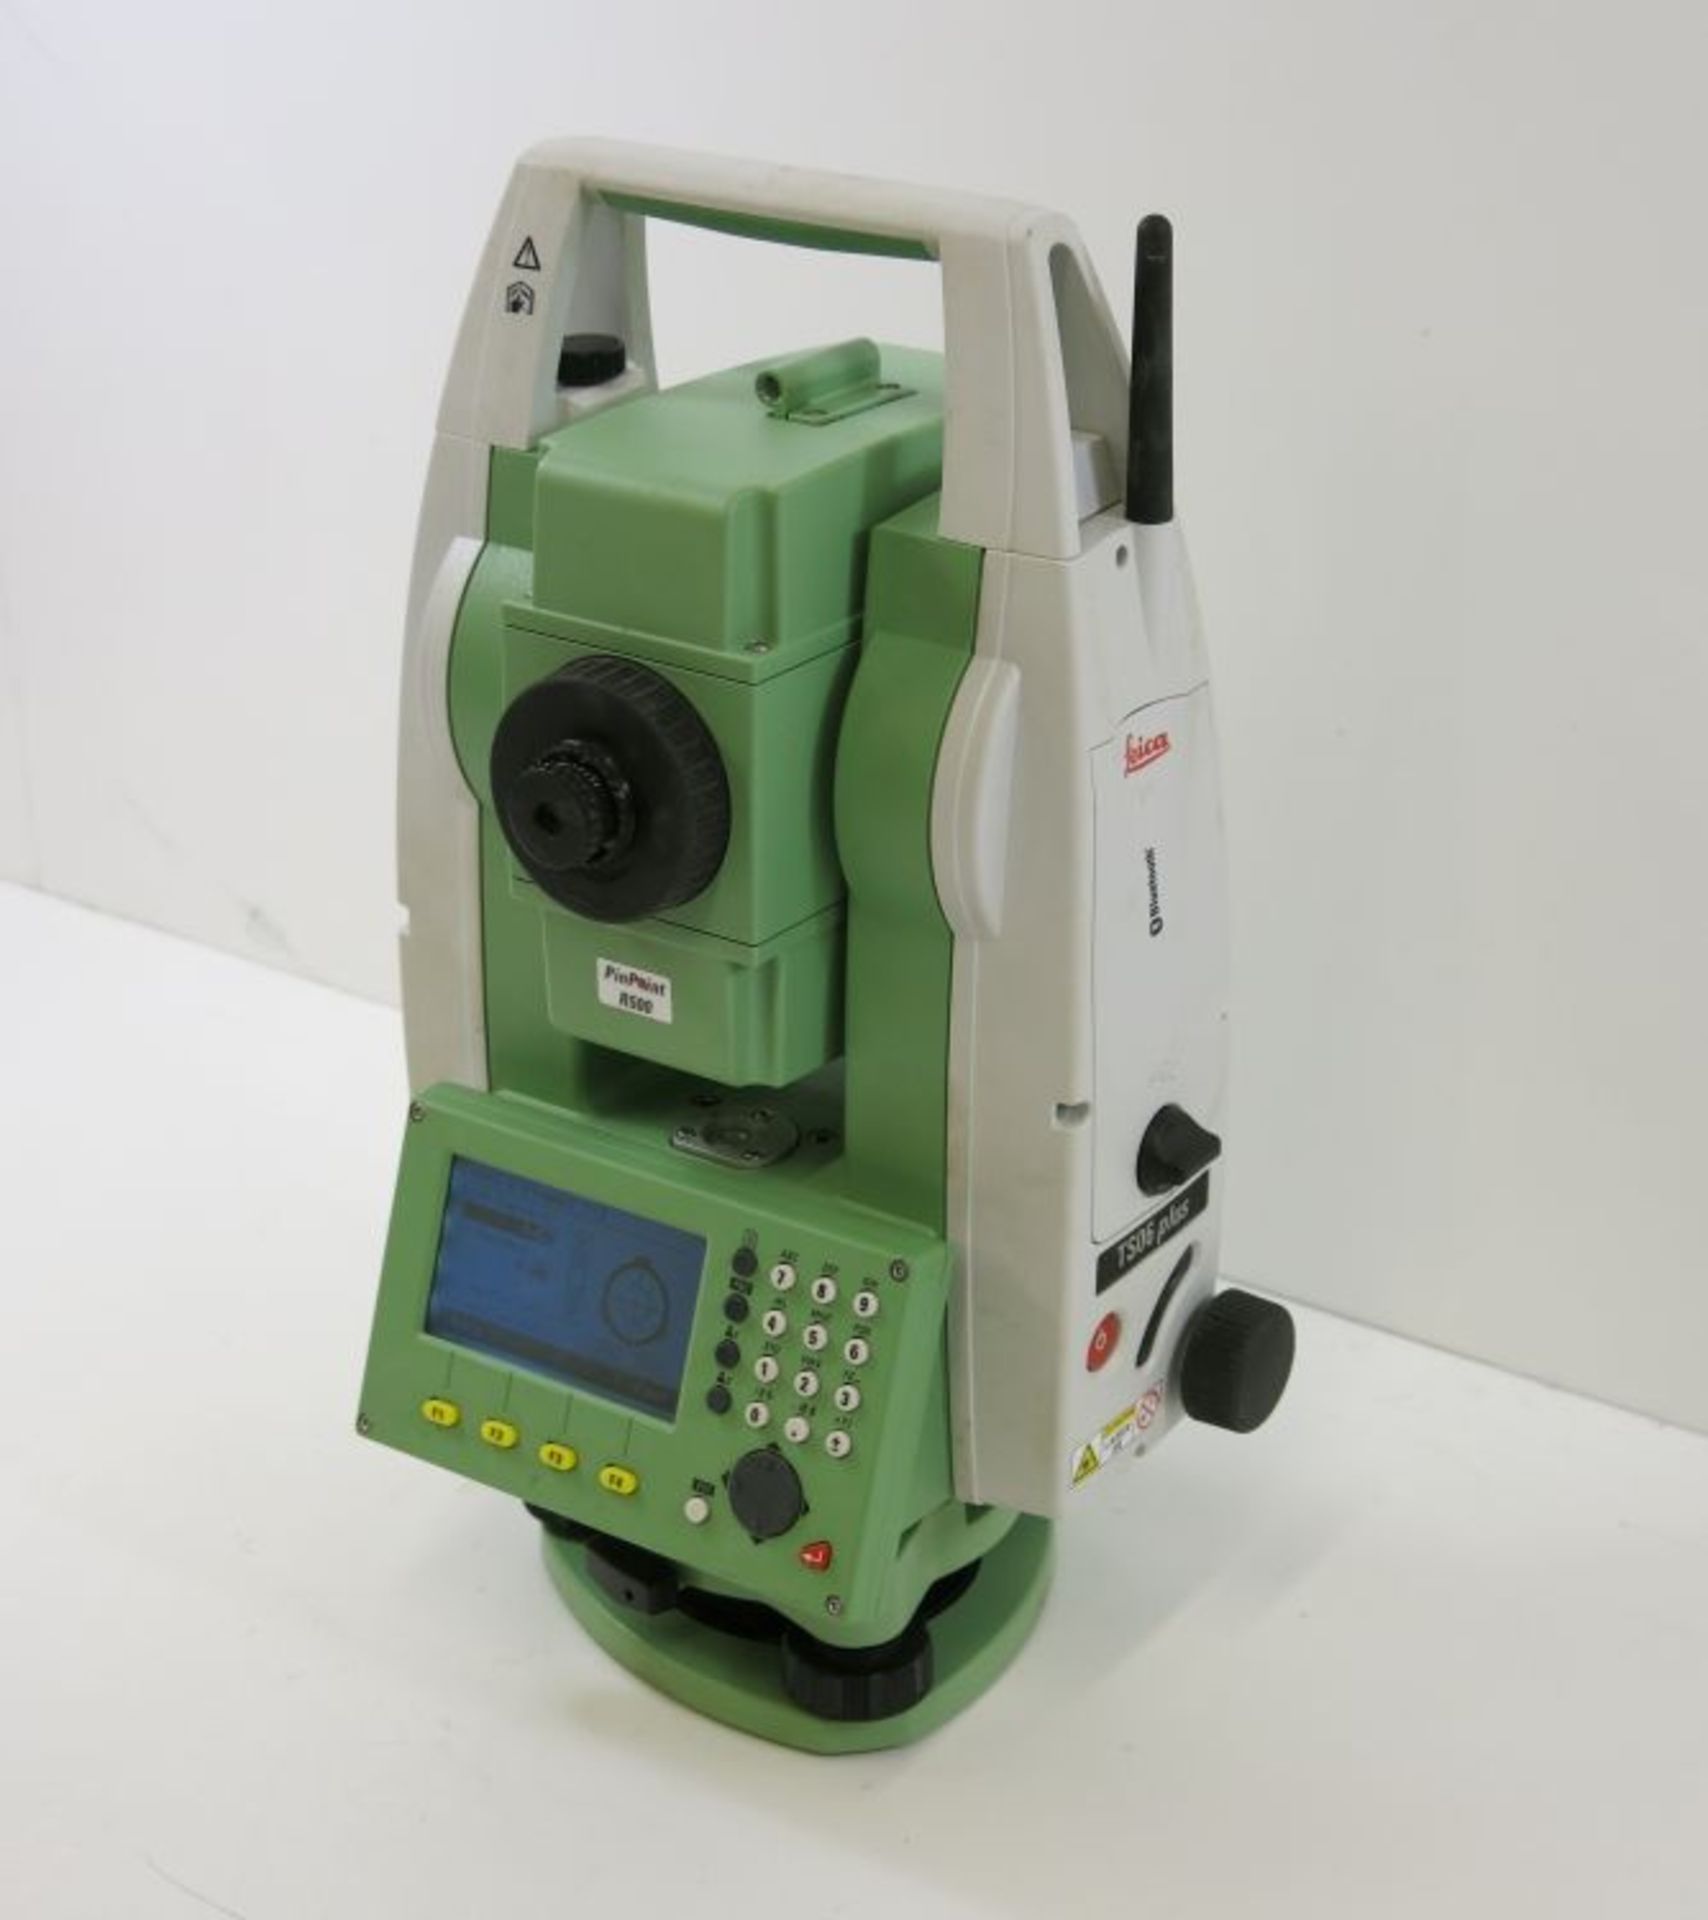 * Leica TS 06 Plus 7'' R500 Total Station Surveying Package comprising: Leica Flexfield TS 06 - Image 5 of 21